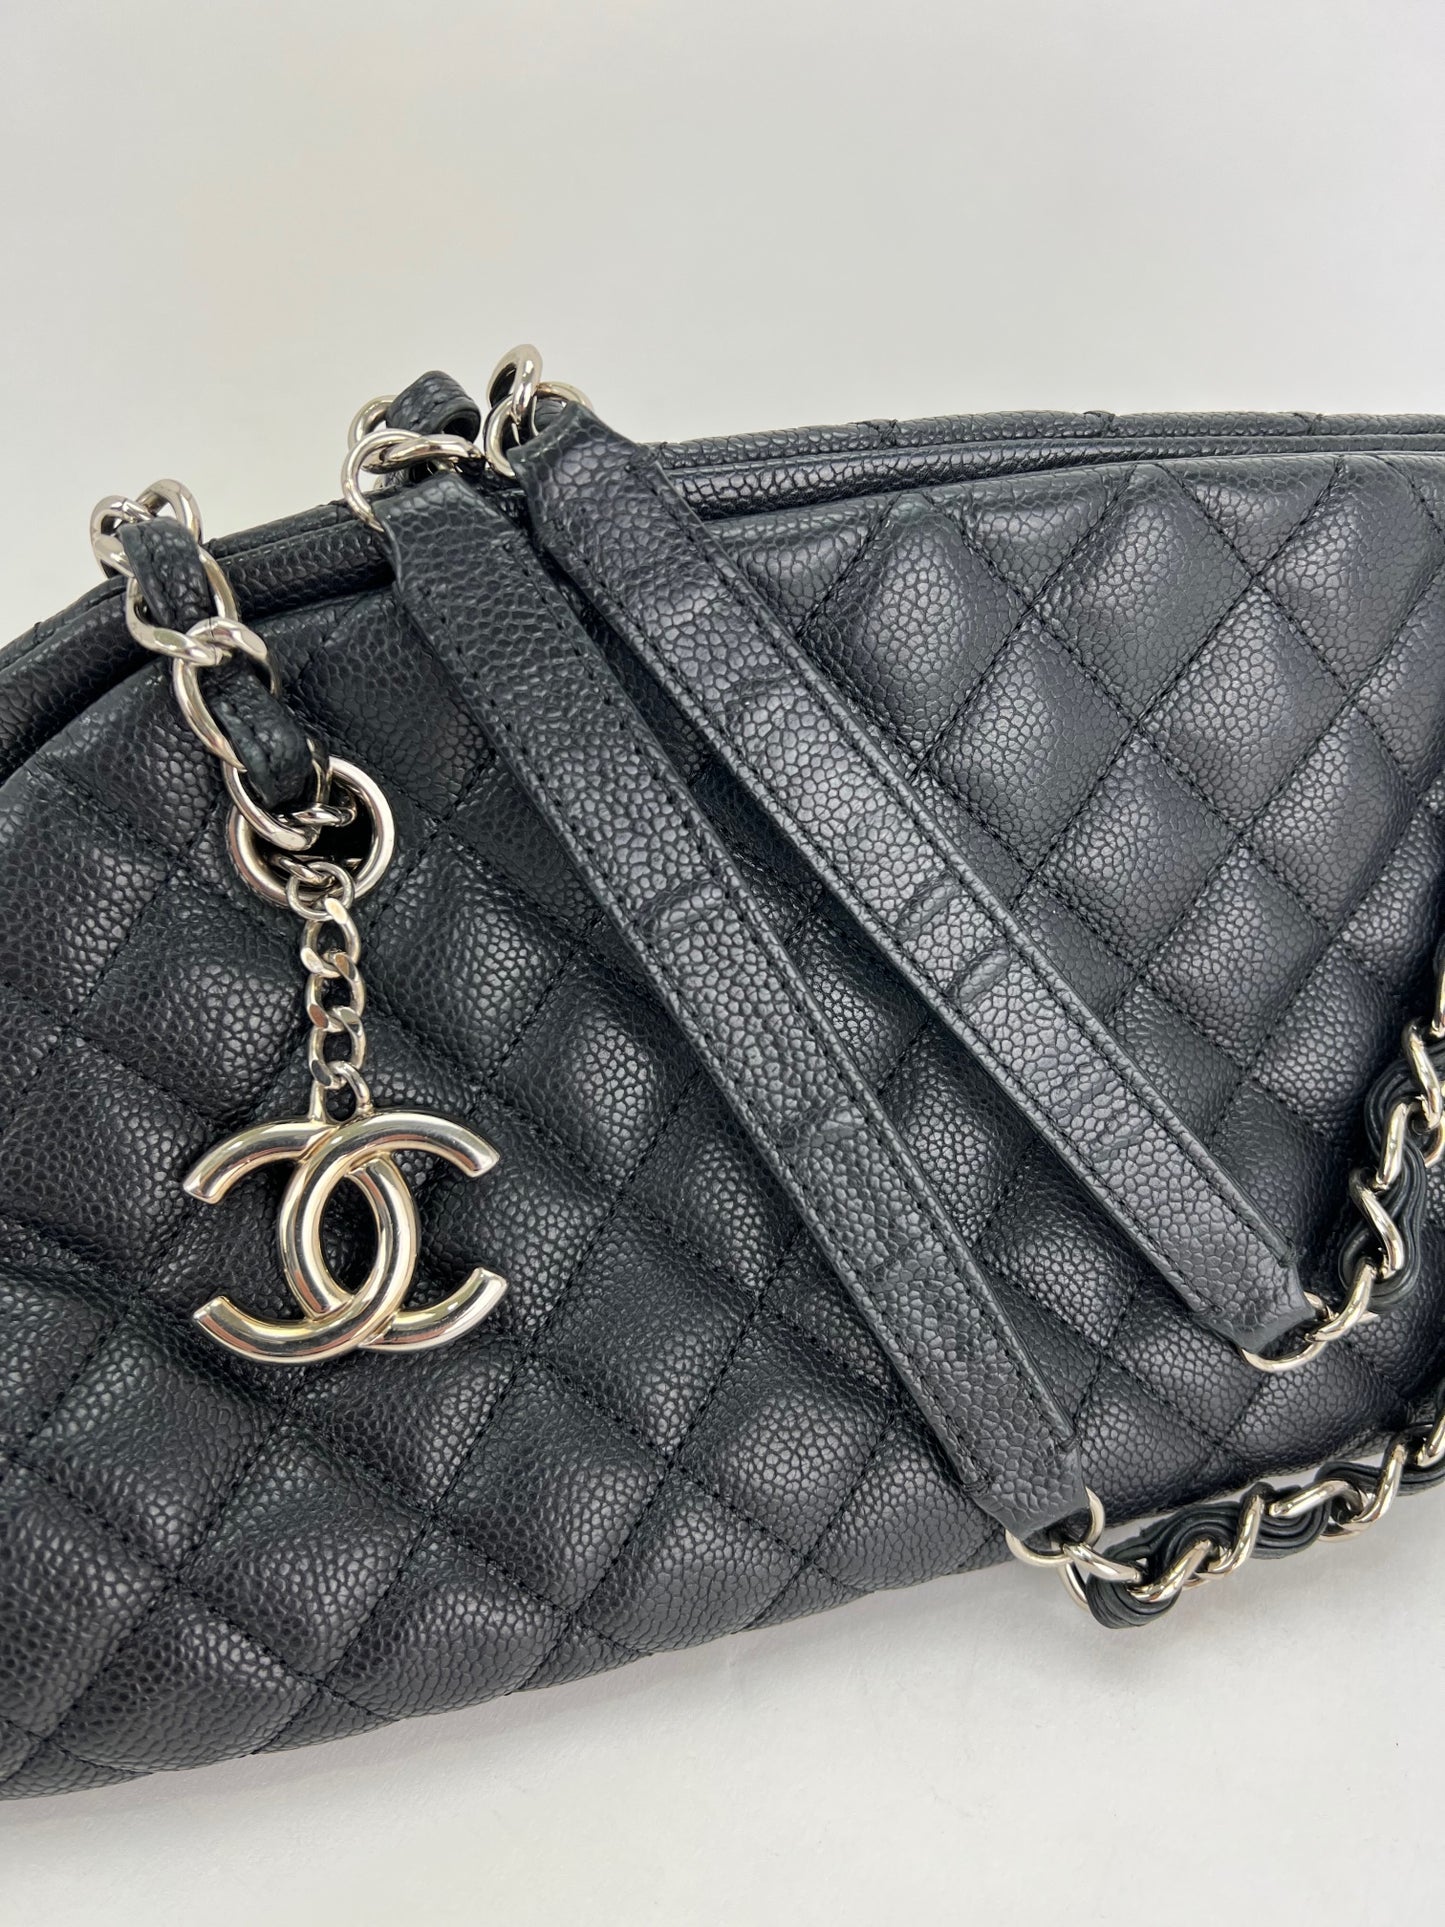 Chanel Just Mademoiselle Quilted Bag